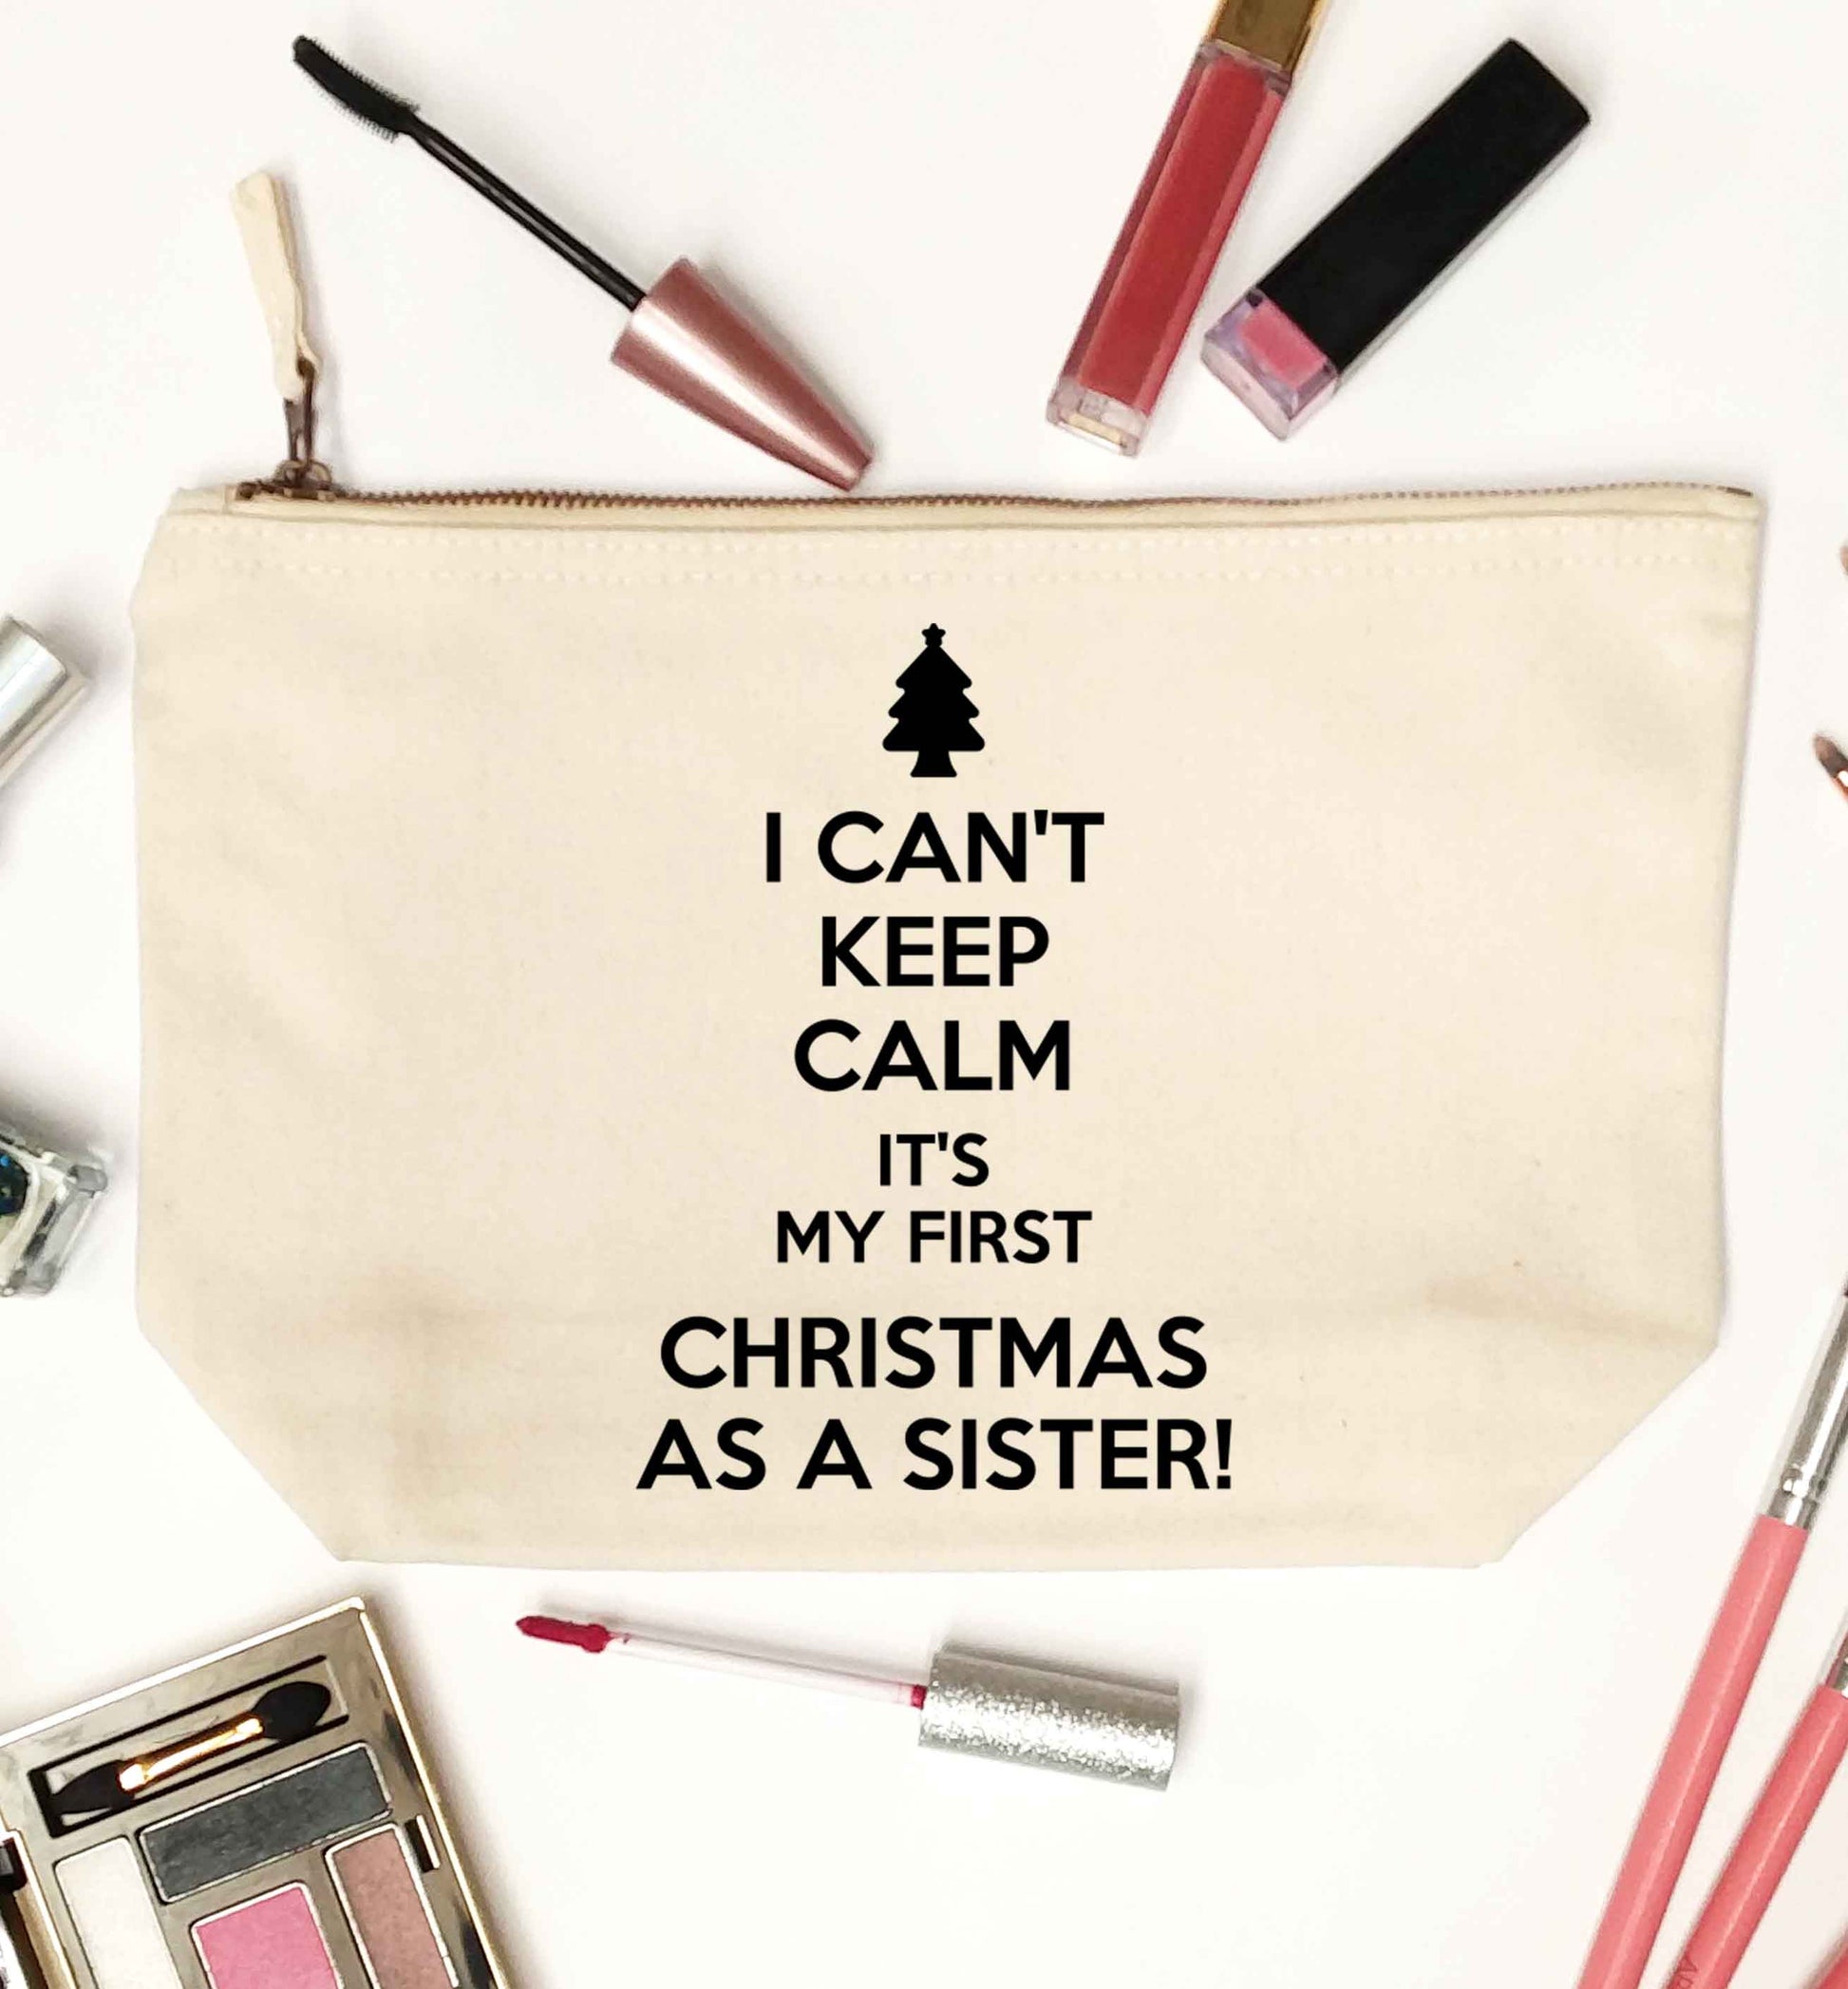 I can't keep calm it's my first Christmas as a sister! natural makeup bag